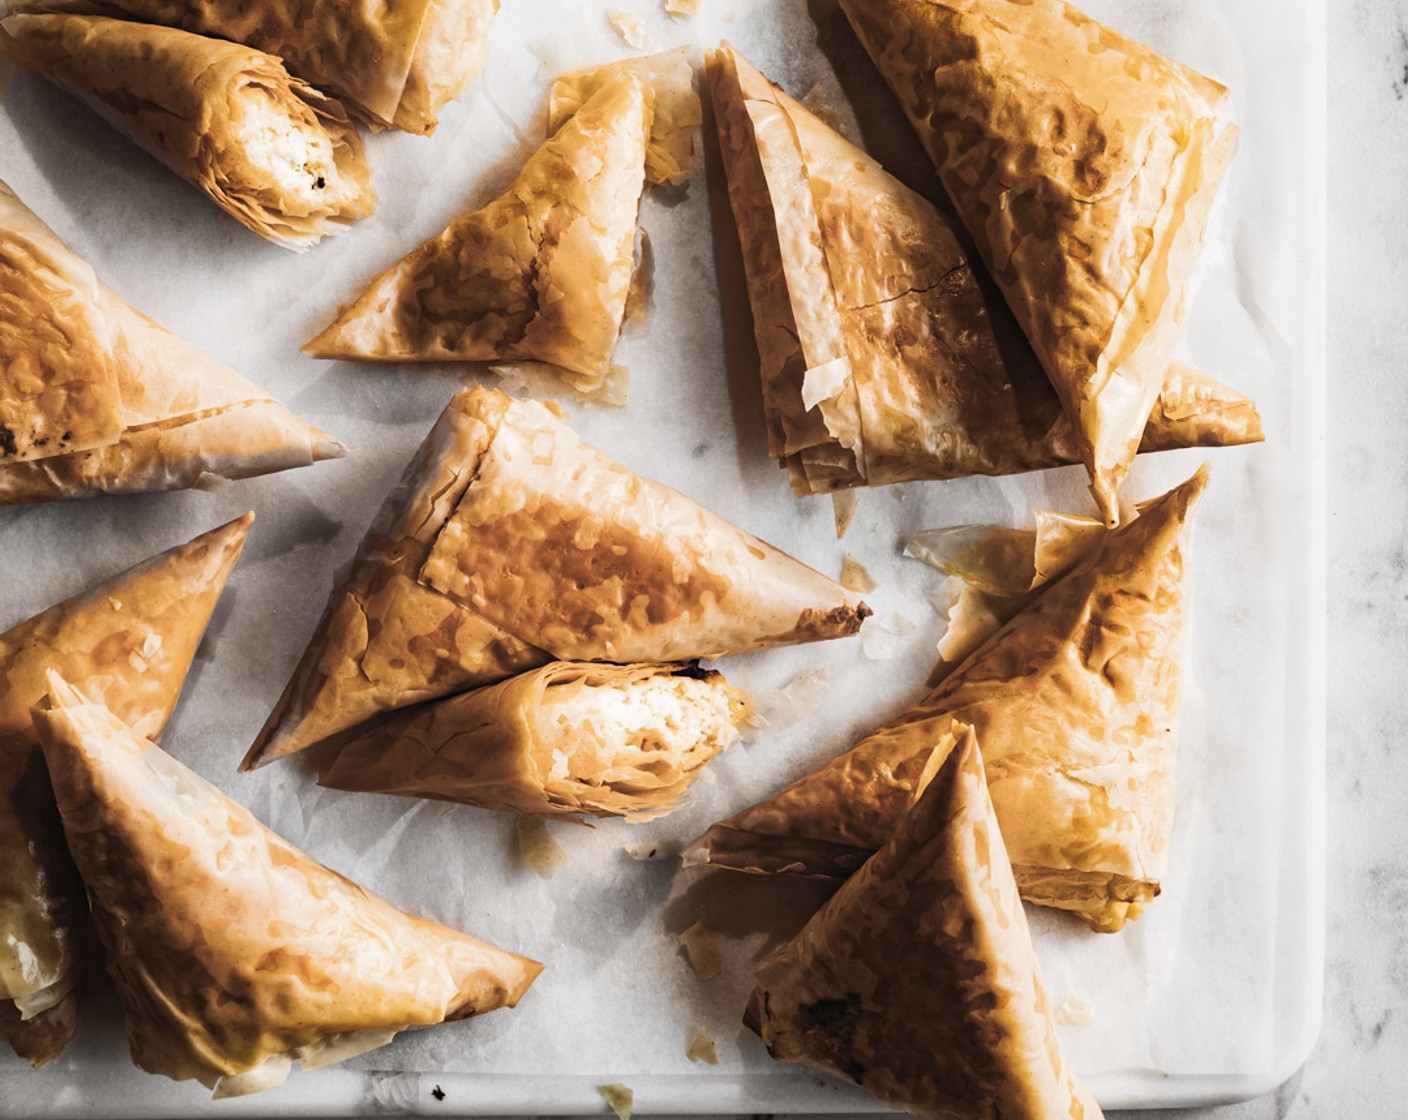 step 9 Bake triangles until they are nicely golden, about 20-25 minutes. If baking from frozen add an extra 5 minutes of bake time. Enjoy!